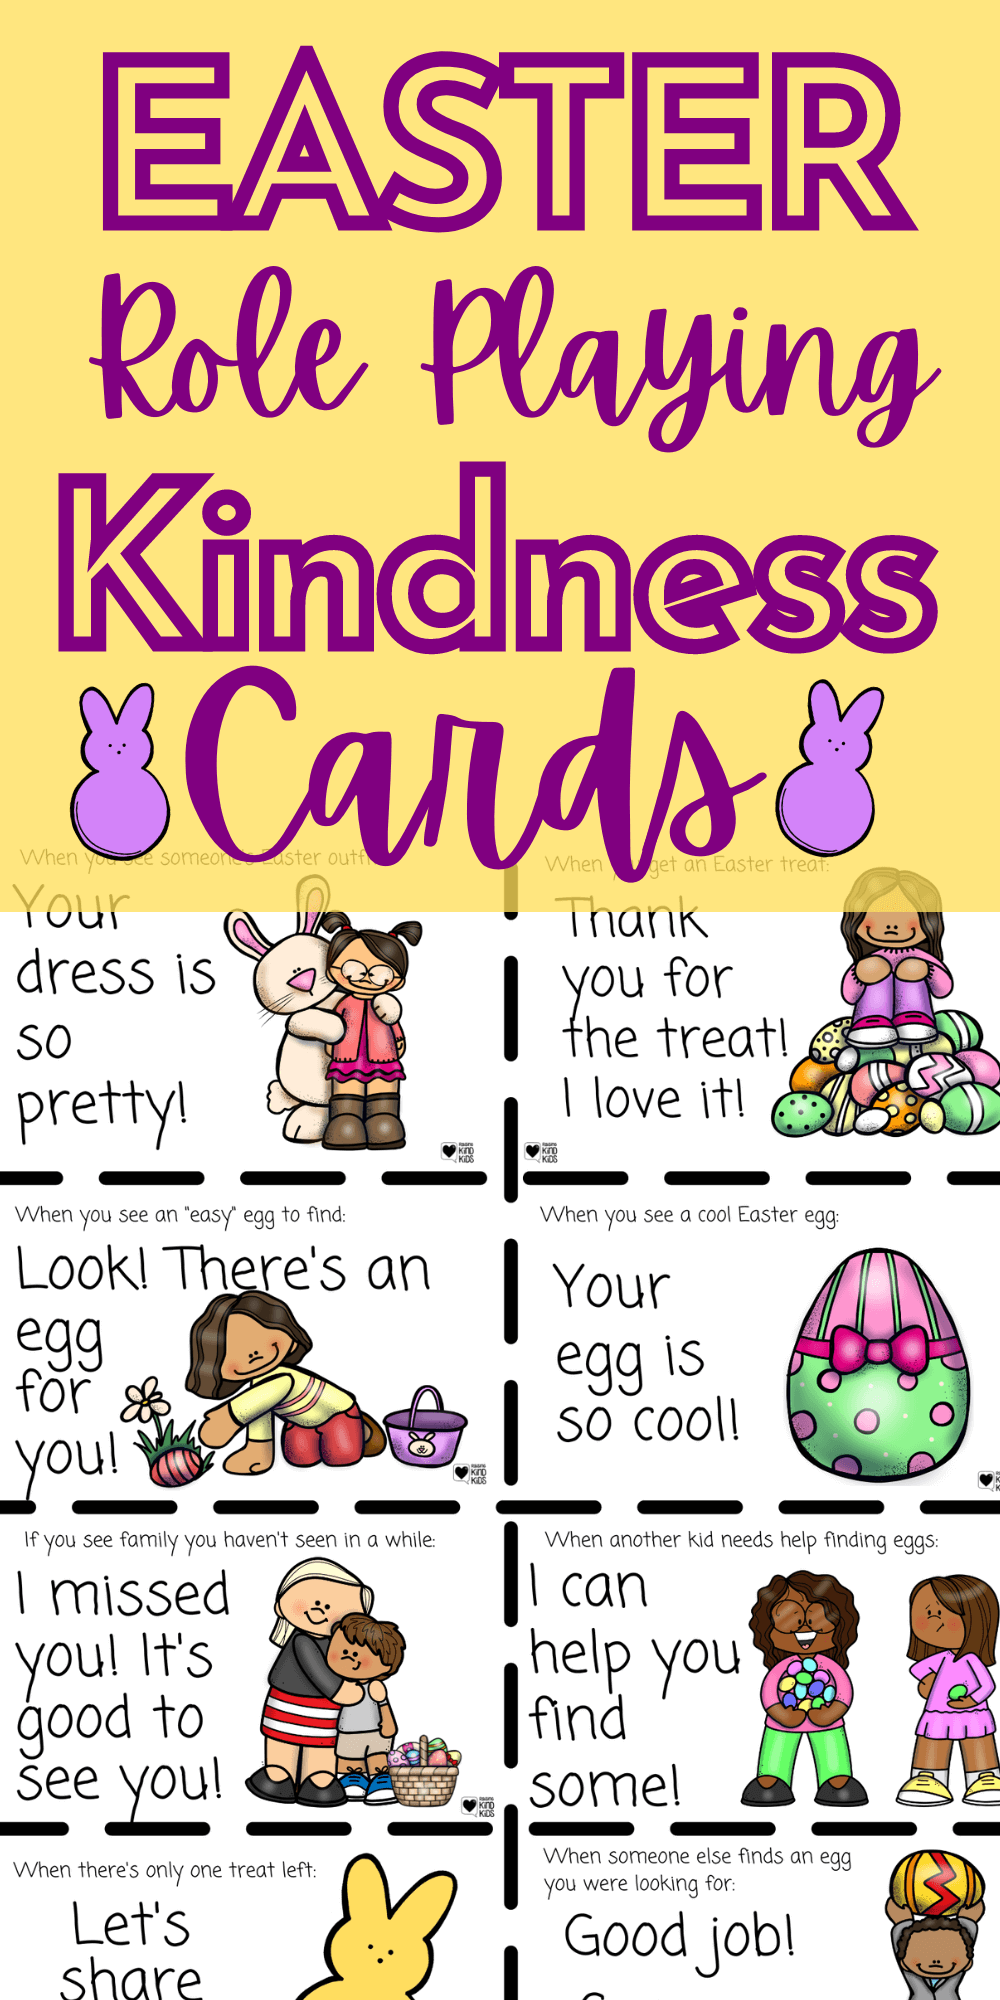 Use these Easter kindness Role Playing Cards with kids to practice how to be kind towards others on Easter